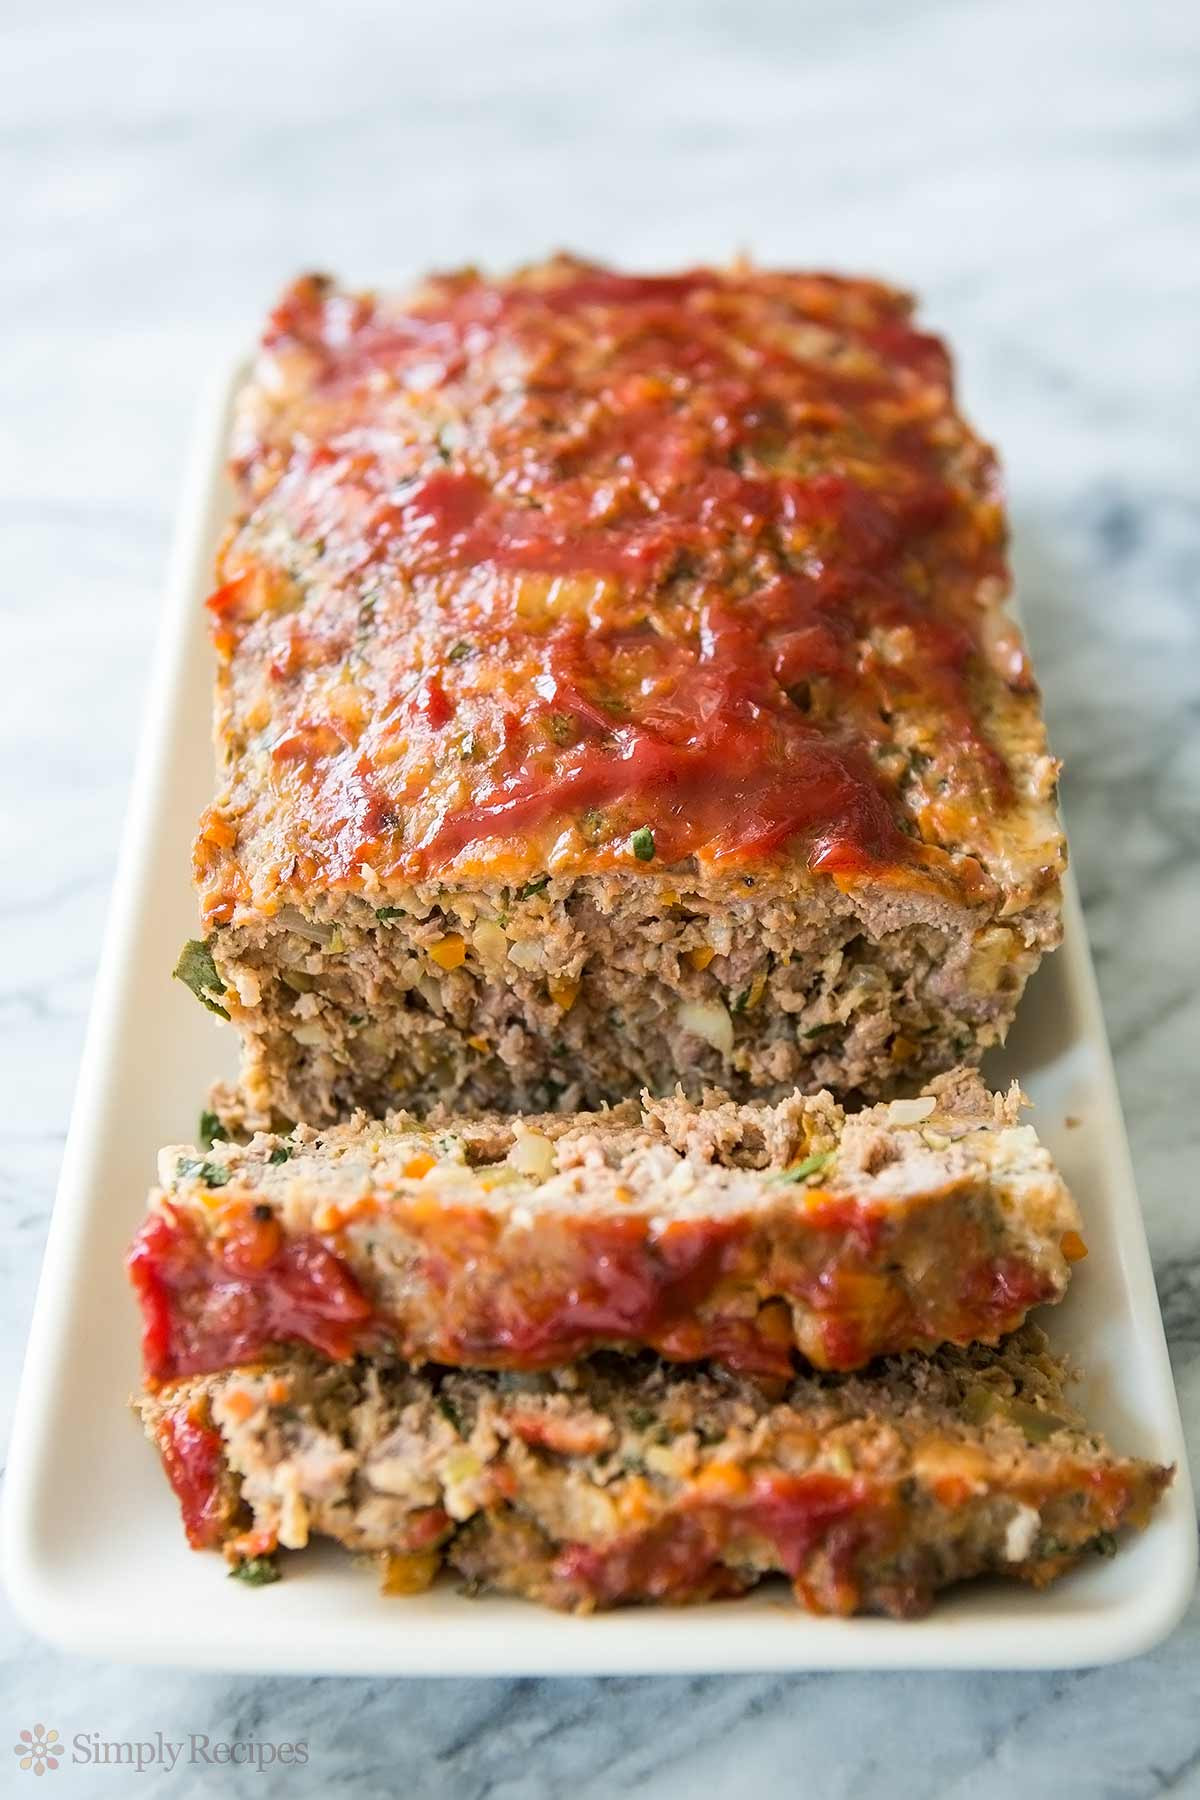 Meatloaf With Beef And Pork
 Classic Meatloaf Recipe